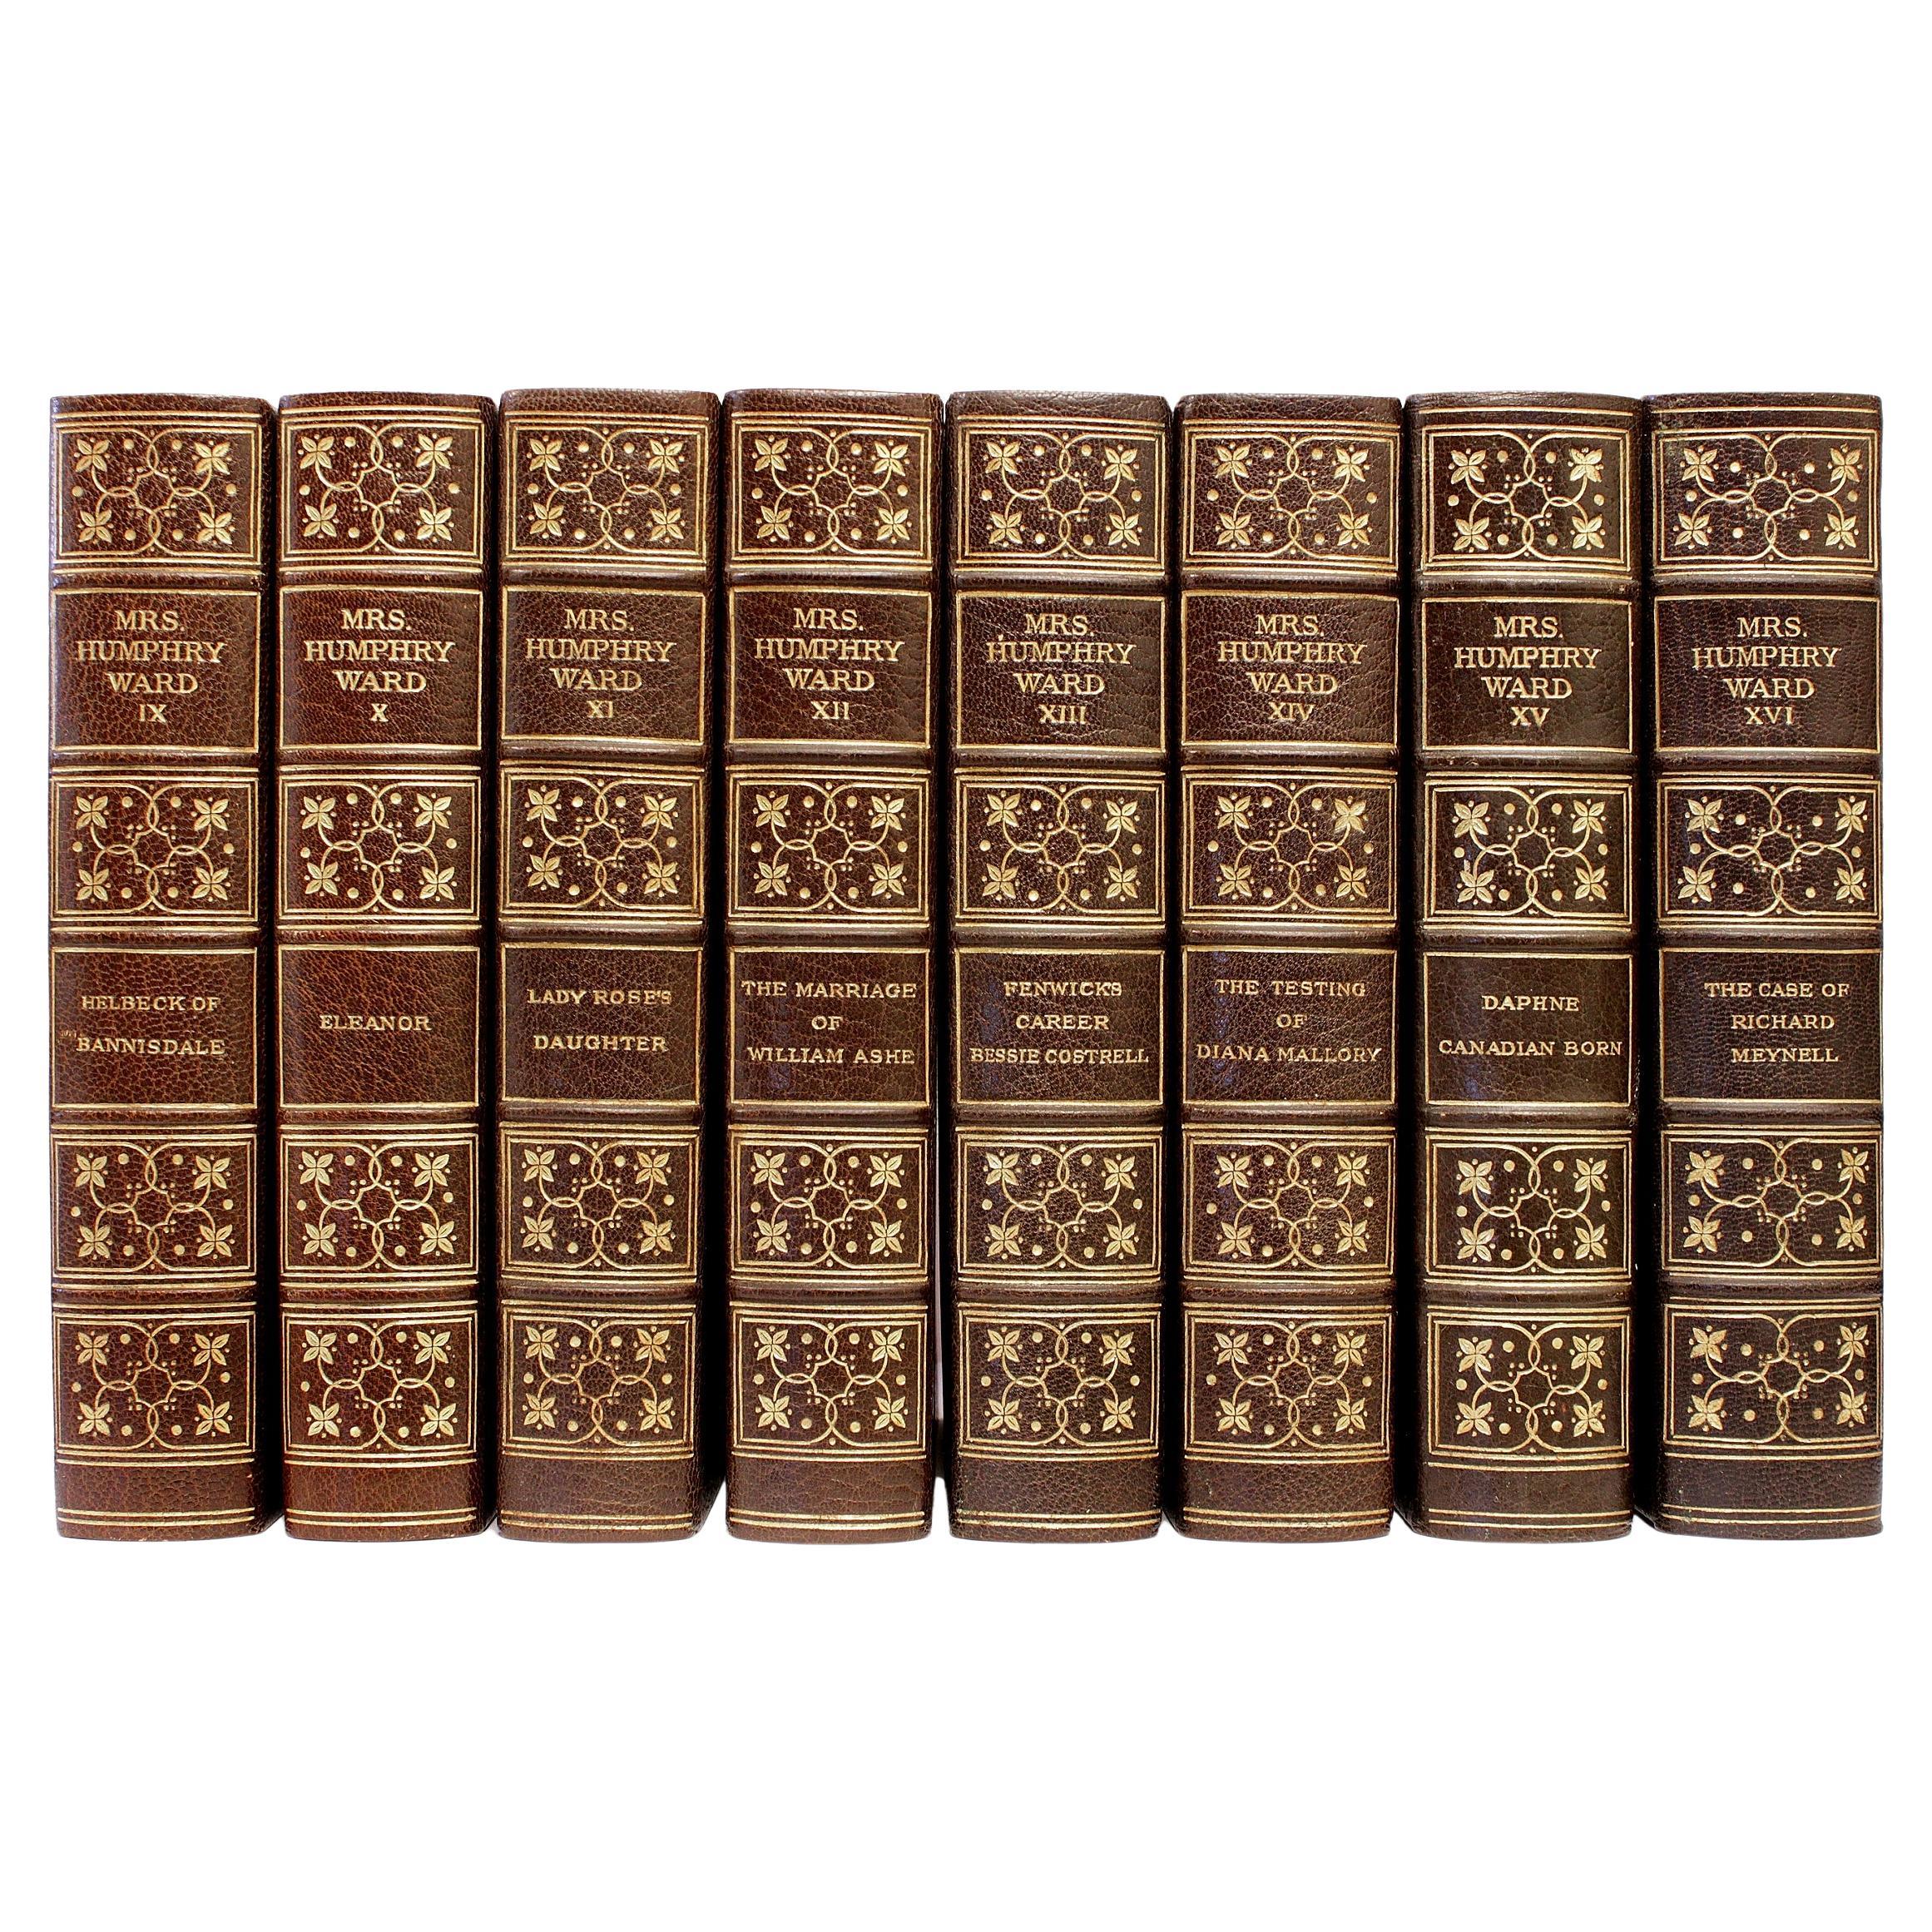 AUTHOR: WARD, Mrs. Humphry [Mary Augusta]. 

TITLE: The Writings of Mrs. Humphry Ward.

PUBLISHER: Boston: Houghton Mifflin Company, 1909.

DESCRIPTION: AUTOGRAPH EDITION. 16 vols., 8-15/16